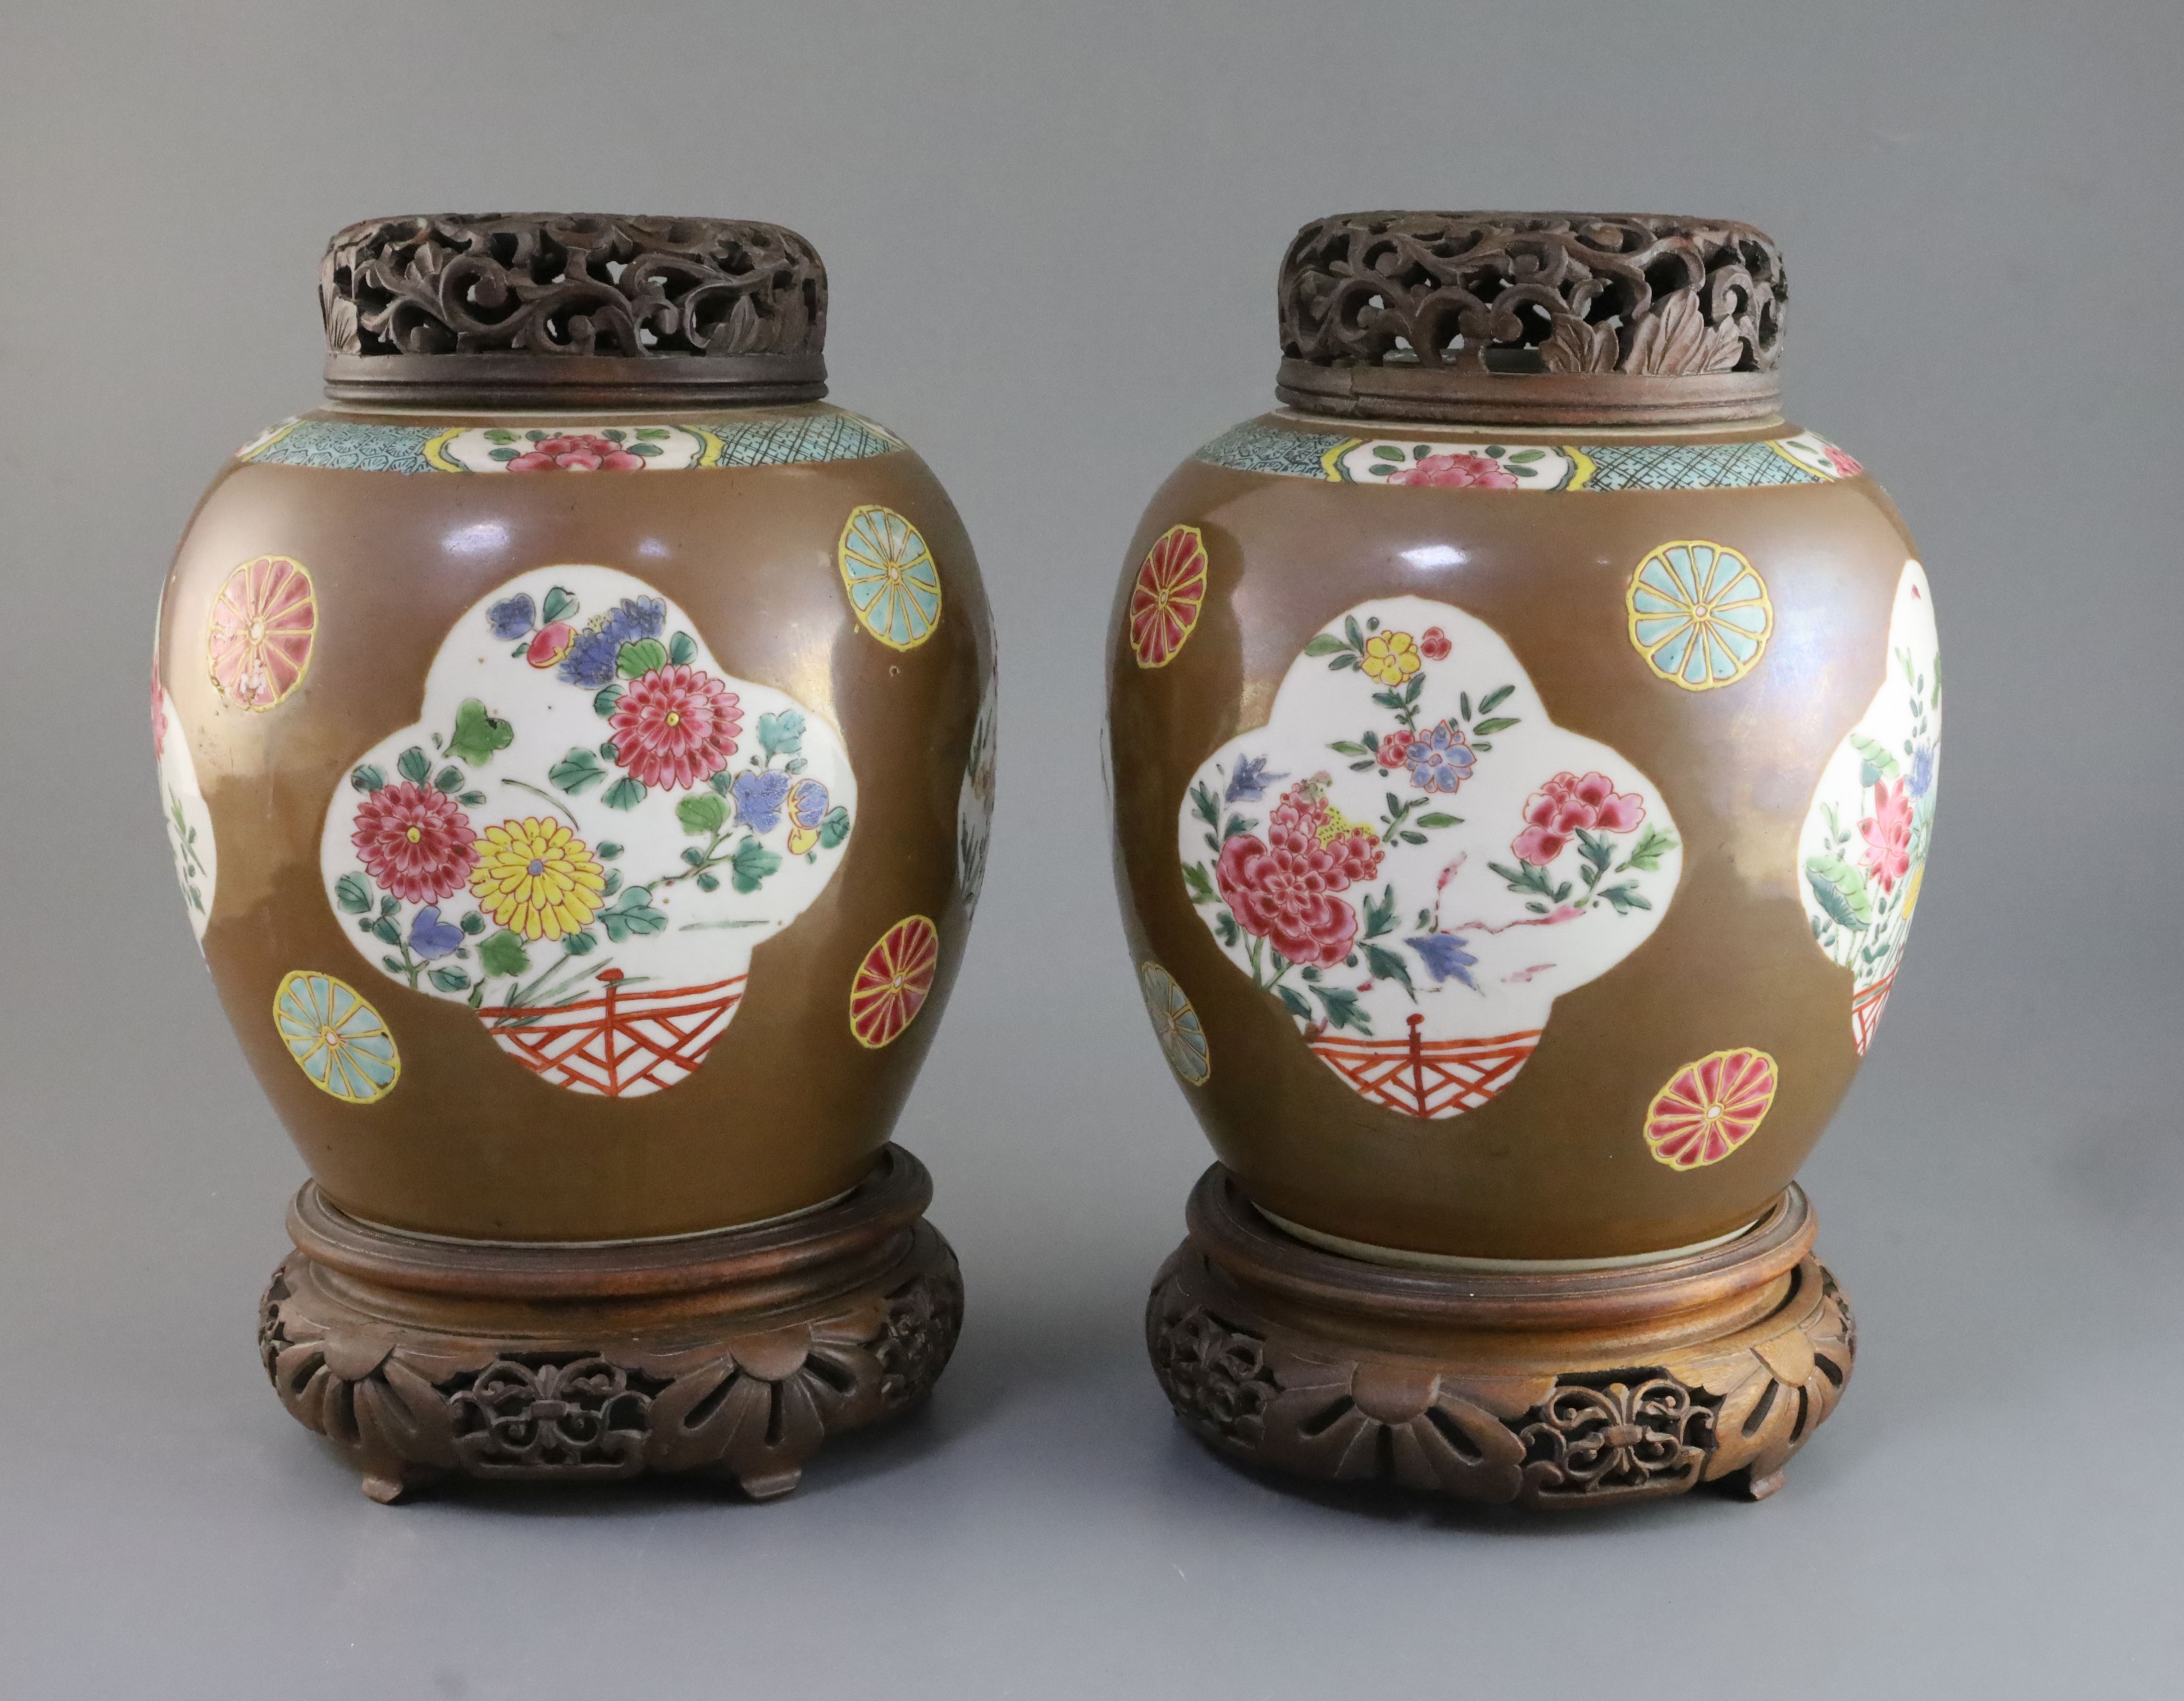 A pair of Chinese export Batavia ware famille rose jars, 18th century, painted with flowers to